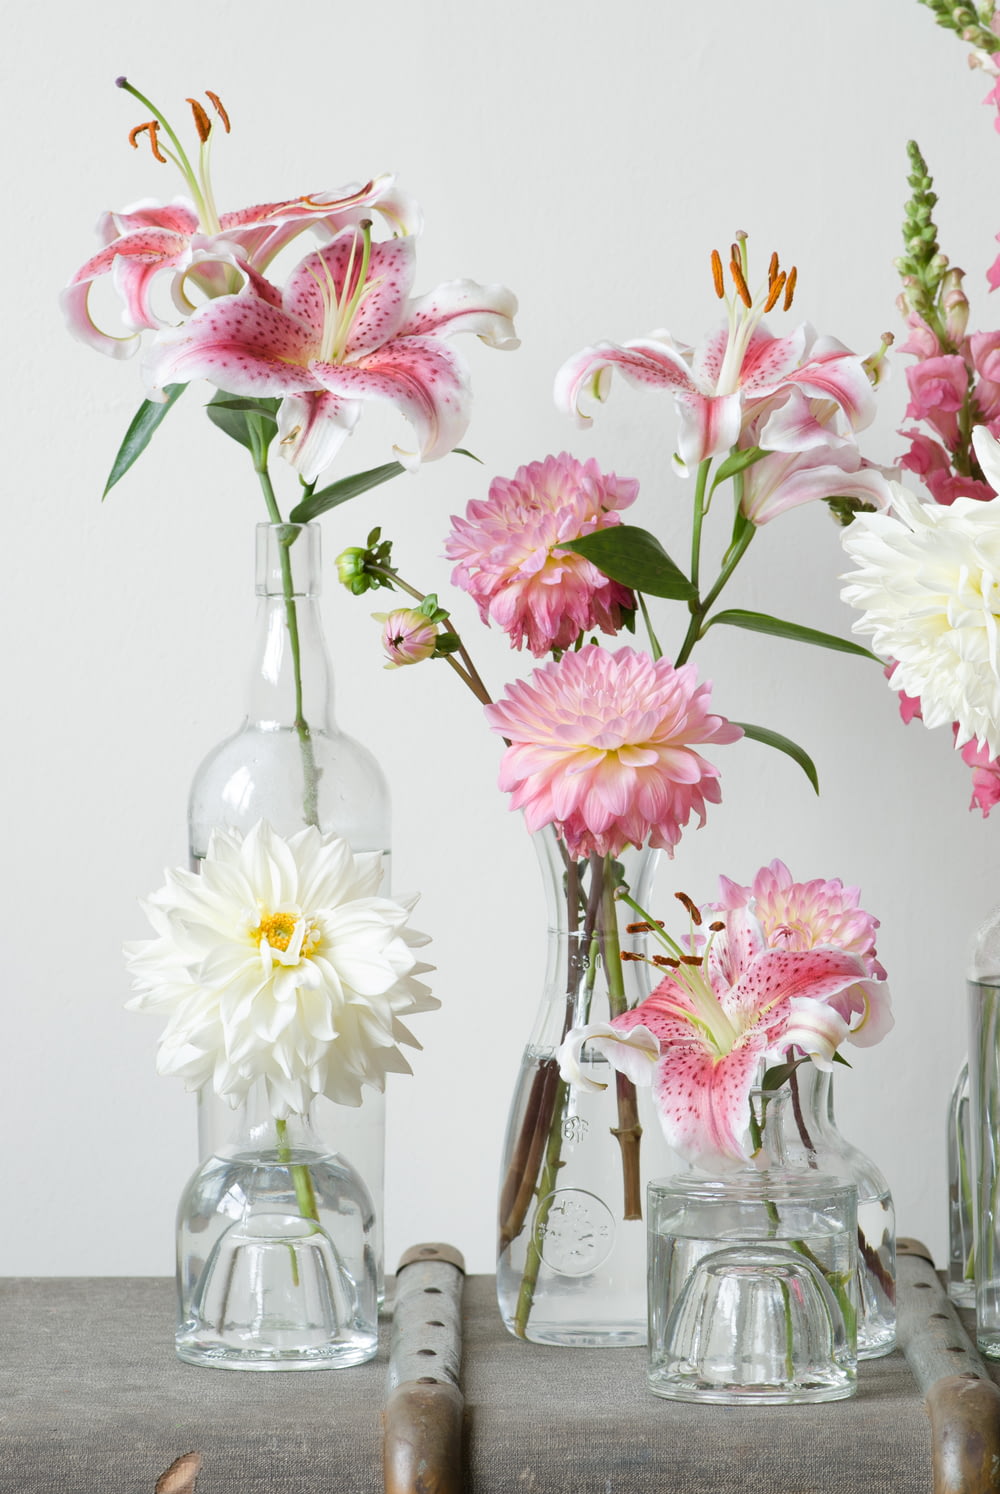 green-leafed plants with pink flowers in clear glass vase